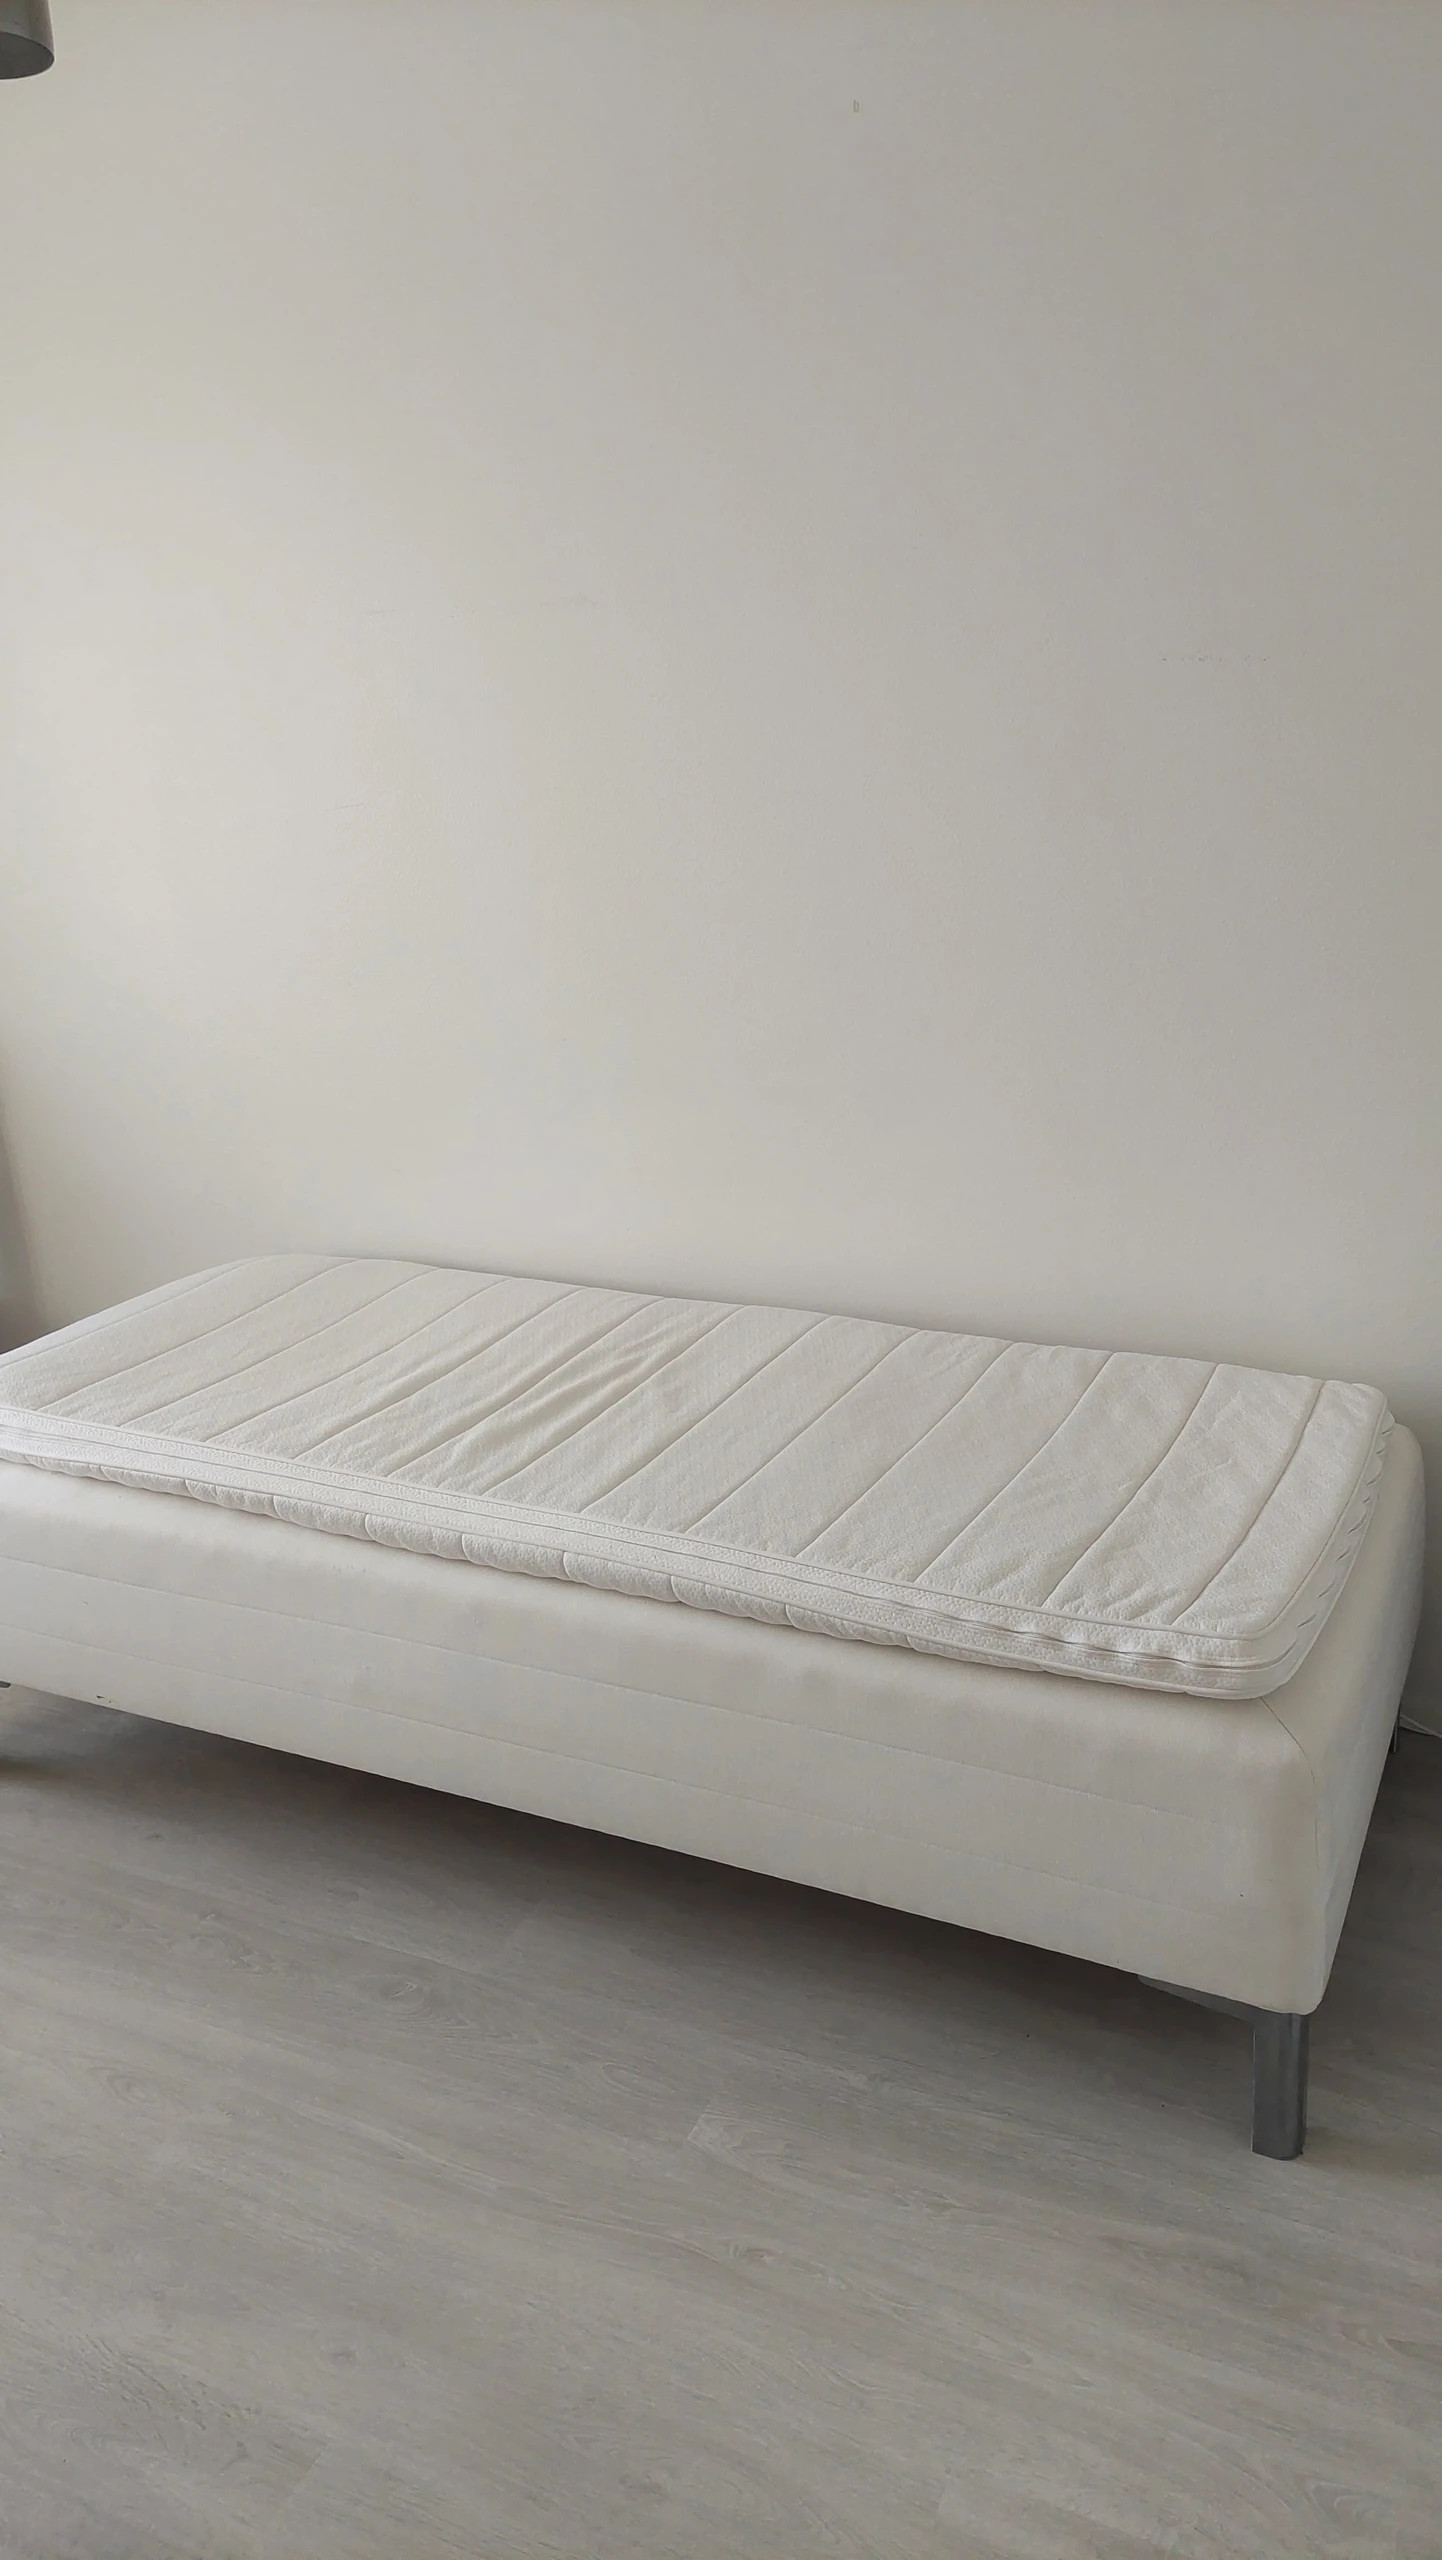 IKEA bed (90×190) and mattress